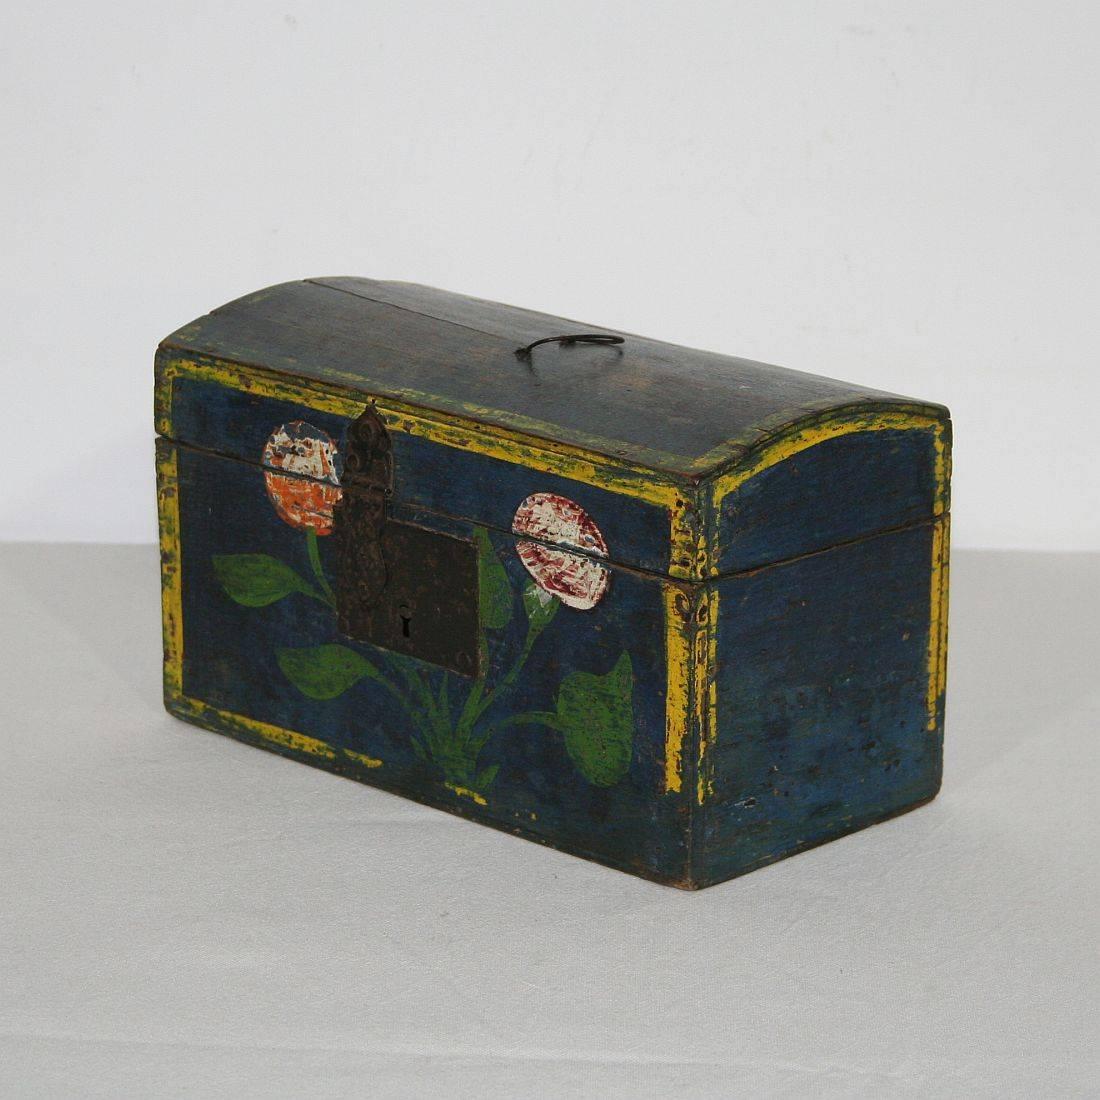 Painted Very Small 19th Century French Folk Art Wedding Box from Normandy